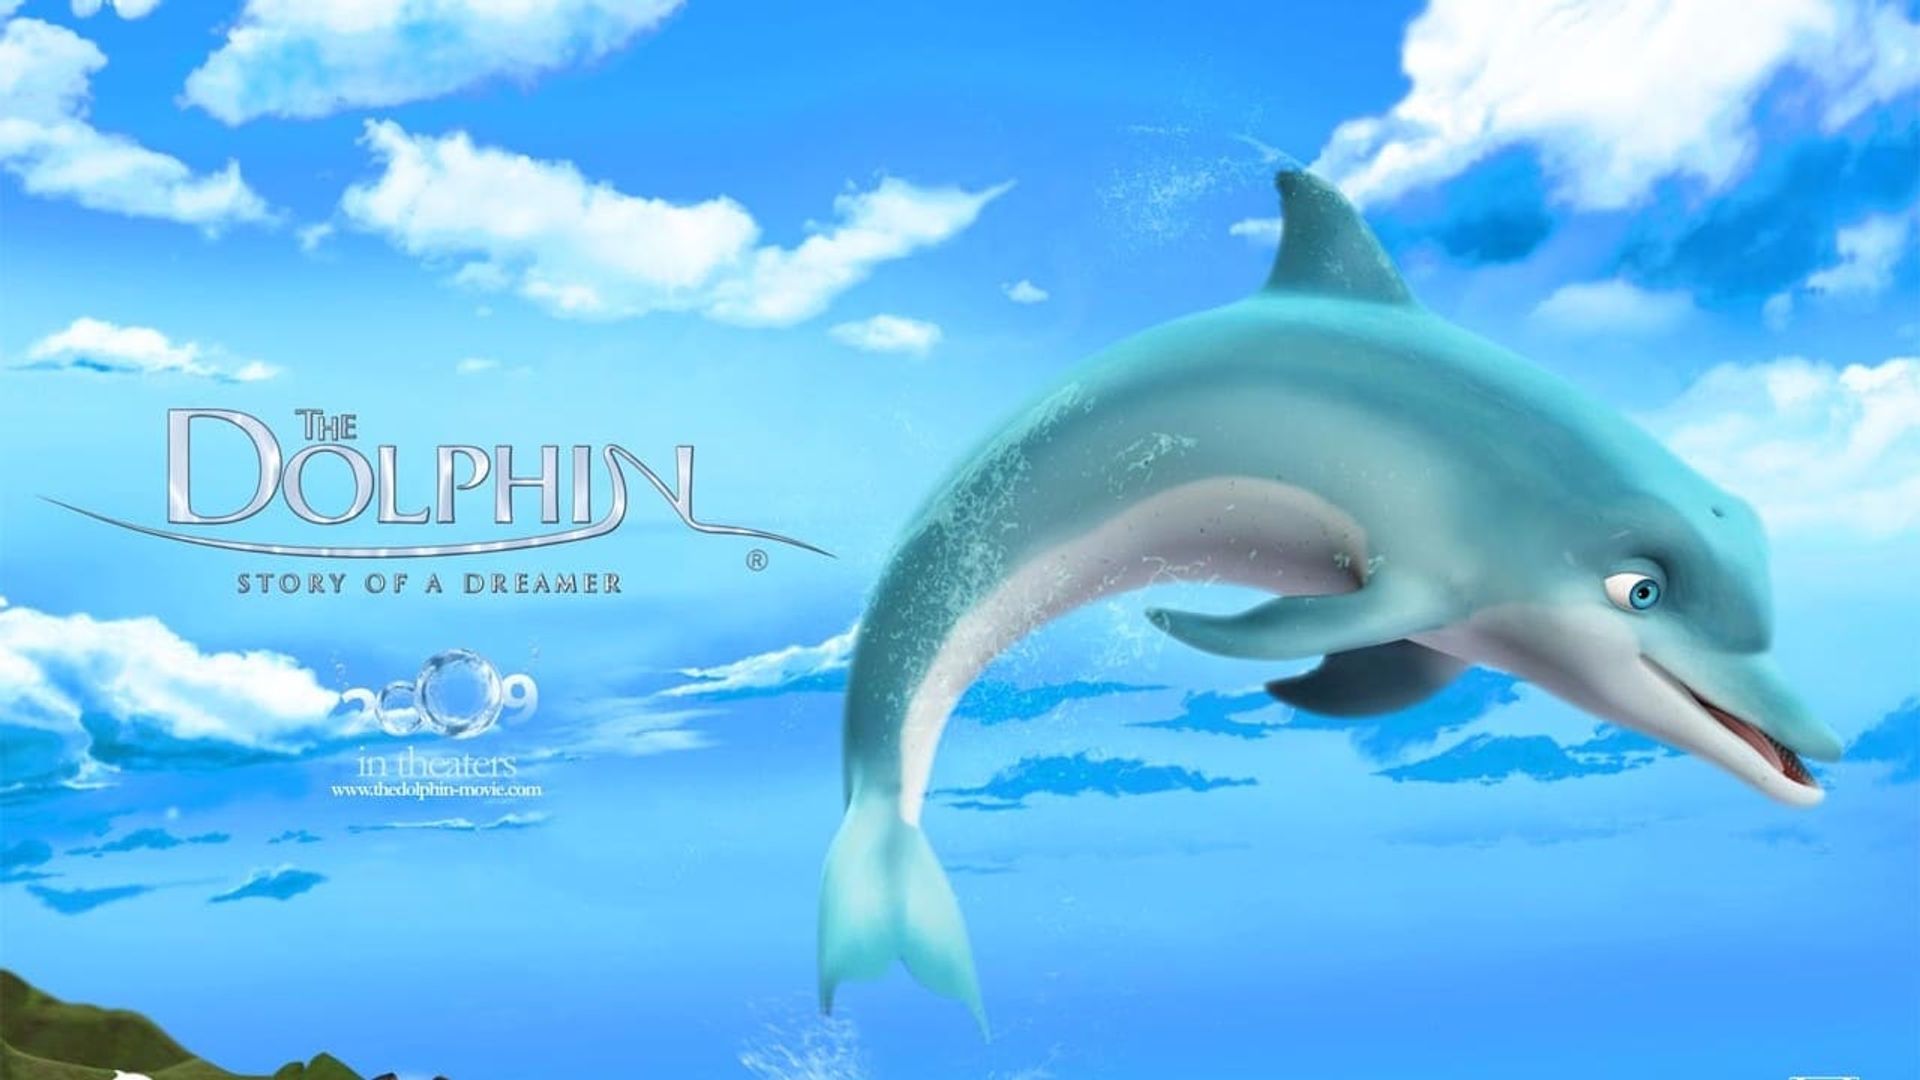 The Dolphin: Story of a Dreamer background